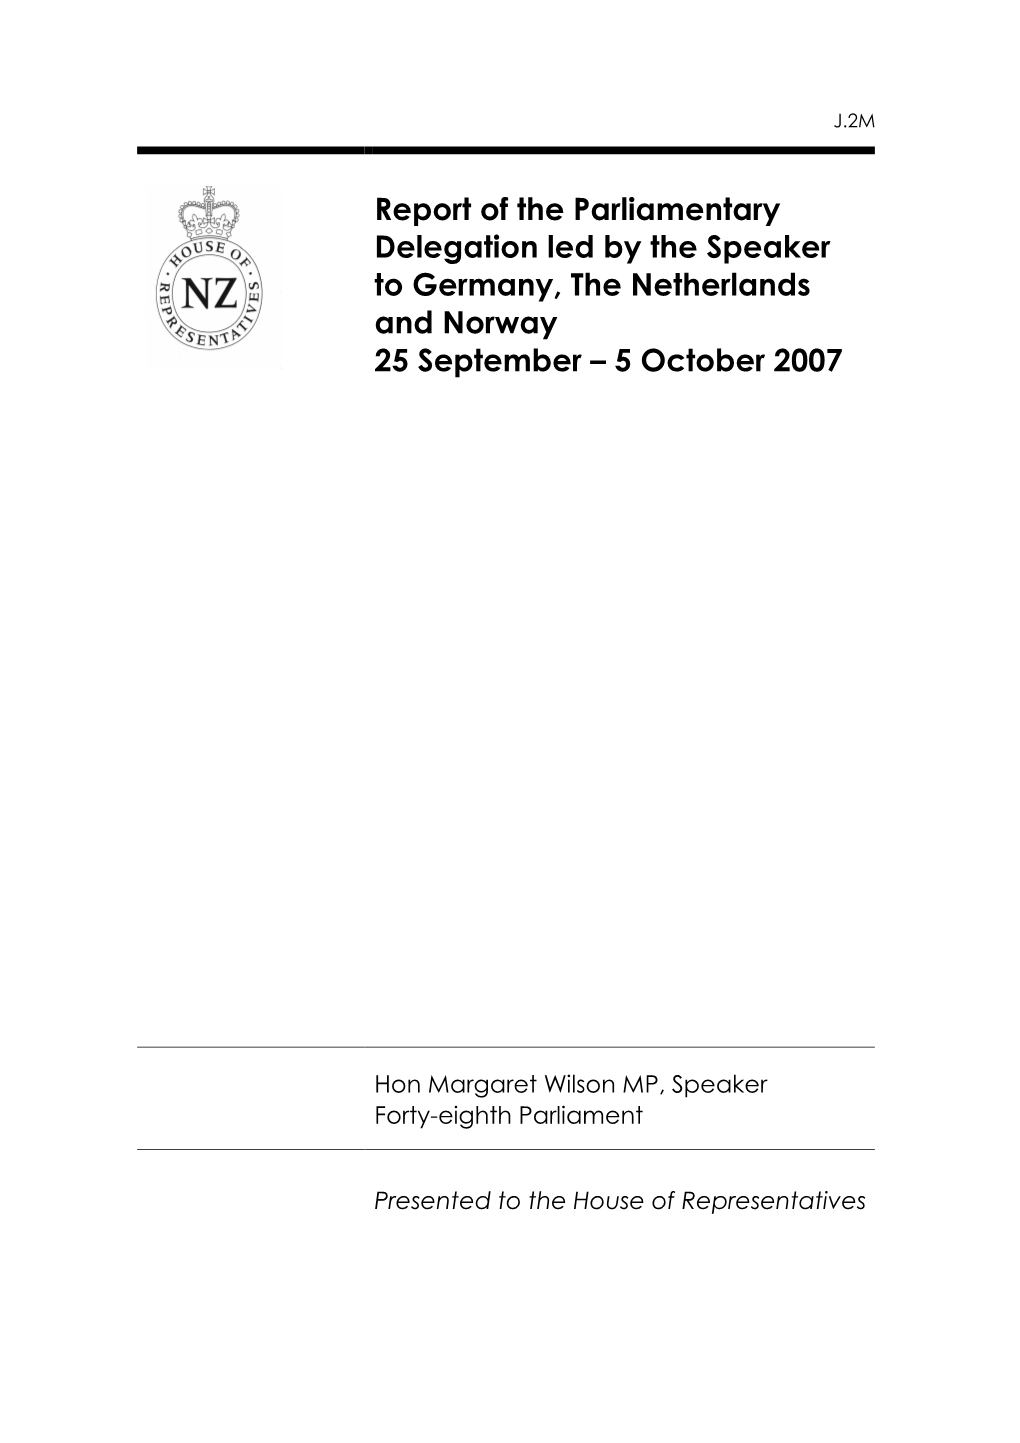 Report of the Parliamentary Delegation Led by the Speaker to Germany, the Netherlands and Norway 25 September – 5 October 2007